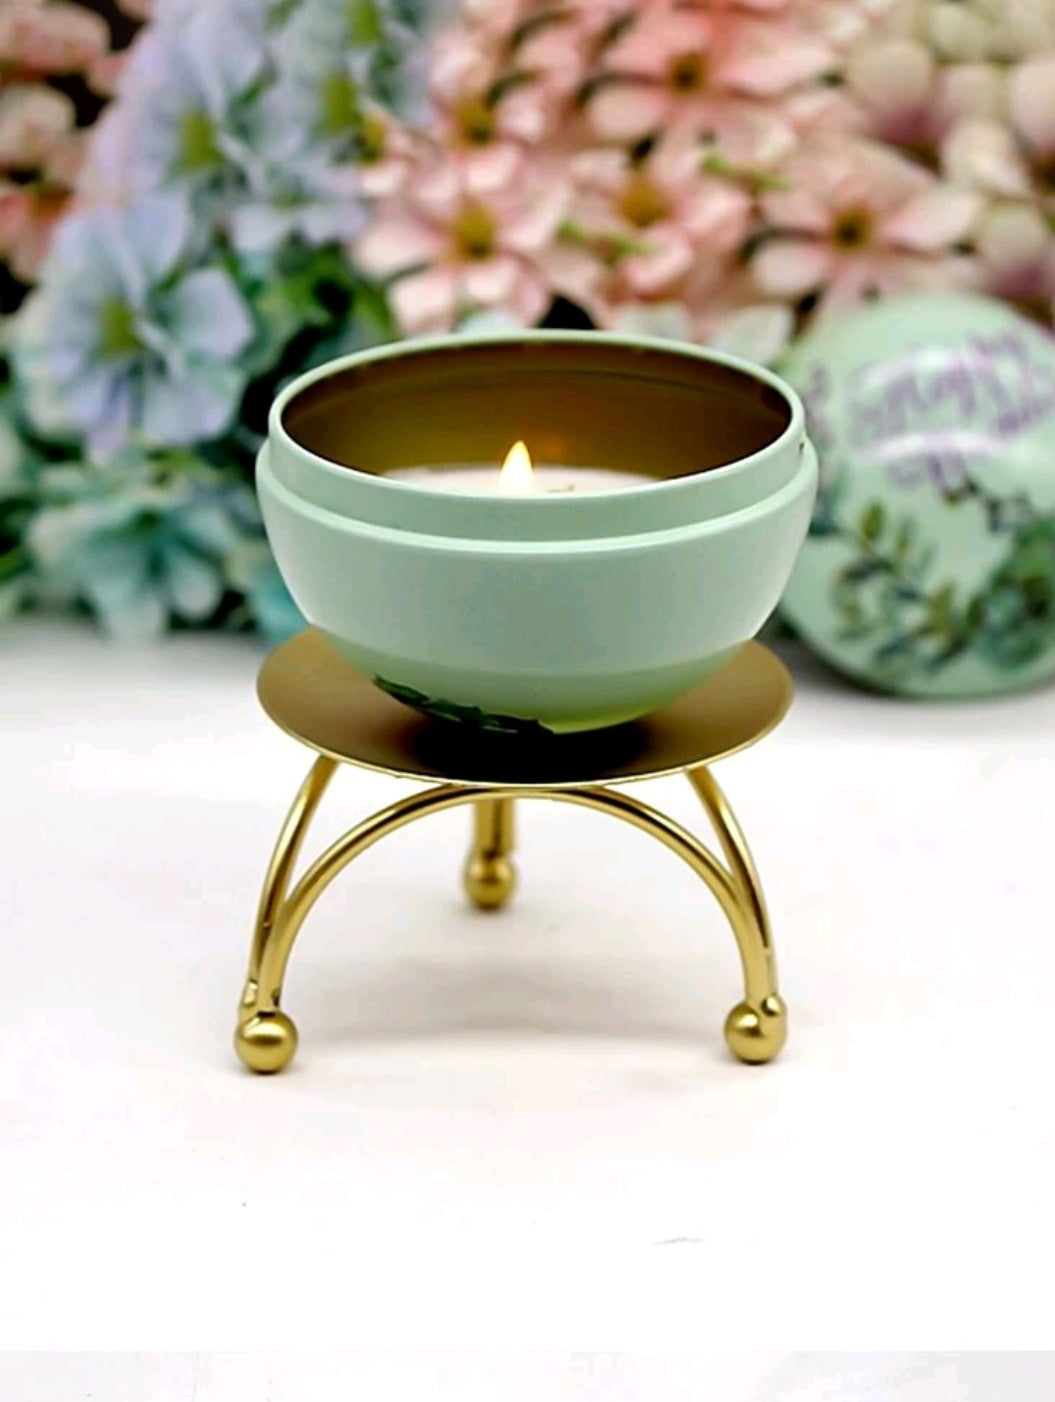 'Cute gold metal candle holder and 1 light blue soya scented candle in a pot'. This adorable candle is made by flowery wax and comes in a decorated tin box which will rest on the elegant candle stand. Candle set handy and very posh! Lovely gift idea and home decor item, perfect present for candle lovers!      Handmade soy wax natural style home decoration     Color: Gold and light blue     Composition: 100% Iron     Size: Height : 4.5 cm/1.8cm Diameter : 7 cm/2.8cm